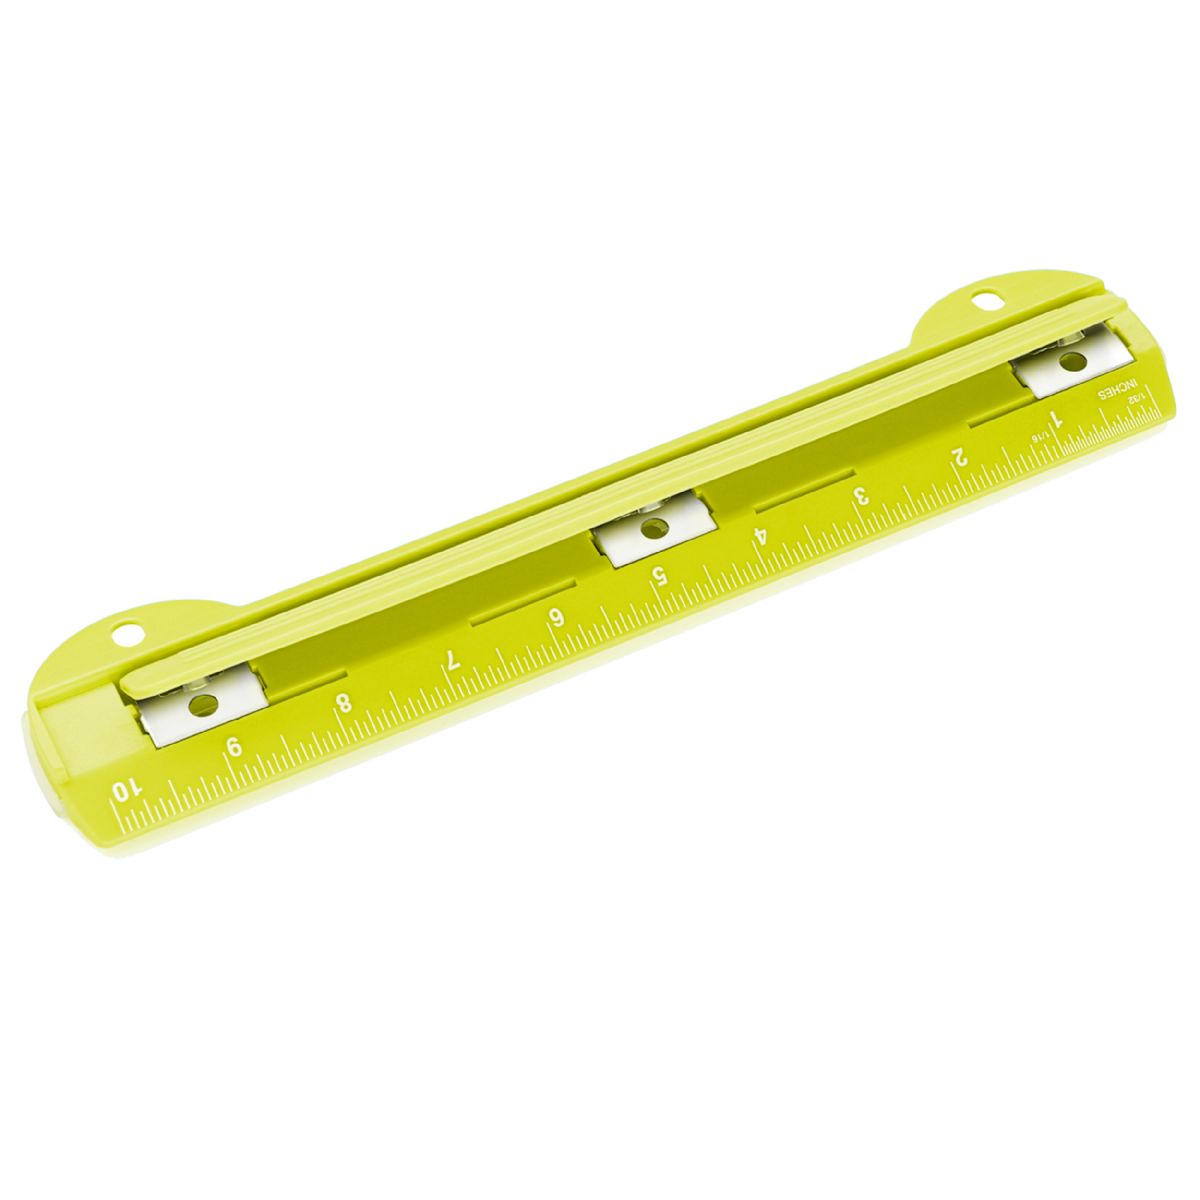 48 Pieces Portable 3-Hole Paper Punch Green - Hole Punchers